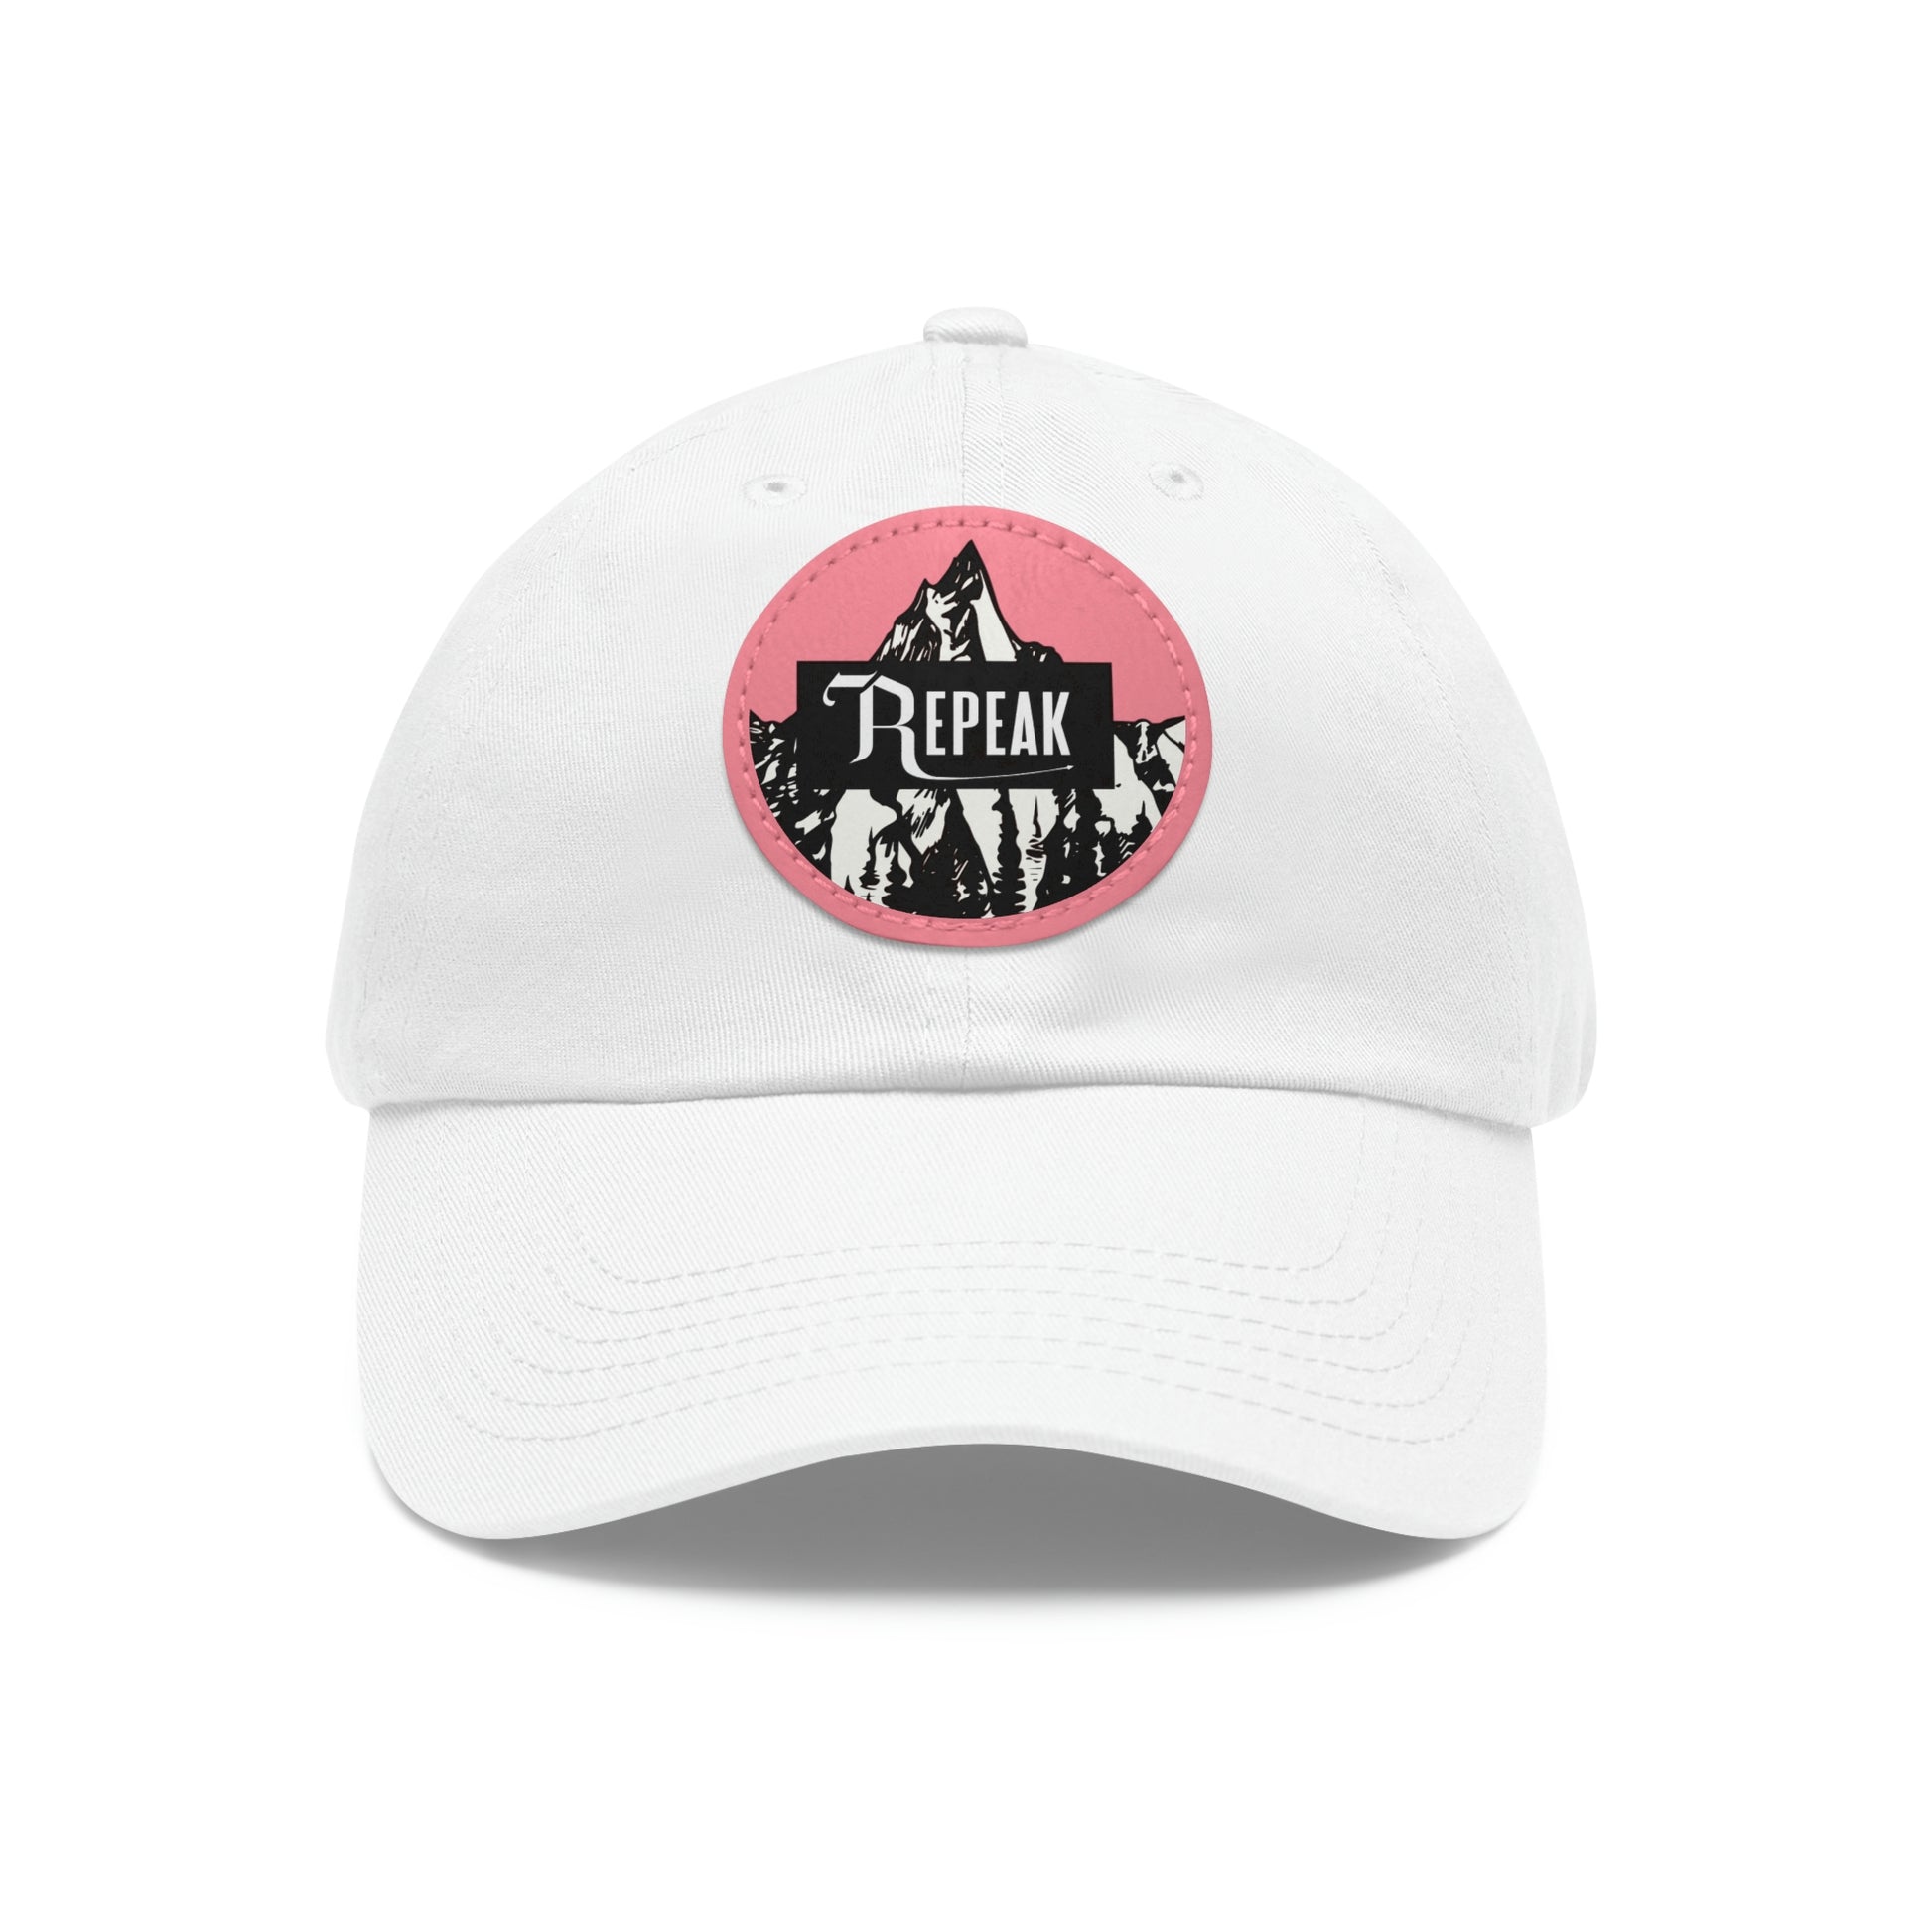 repeak energy dad hat, black, white, and pink, front side